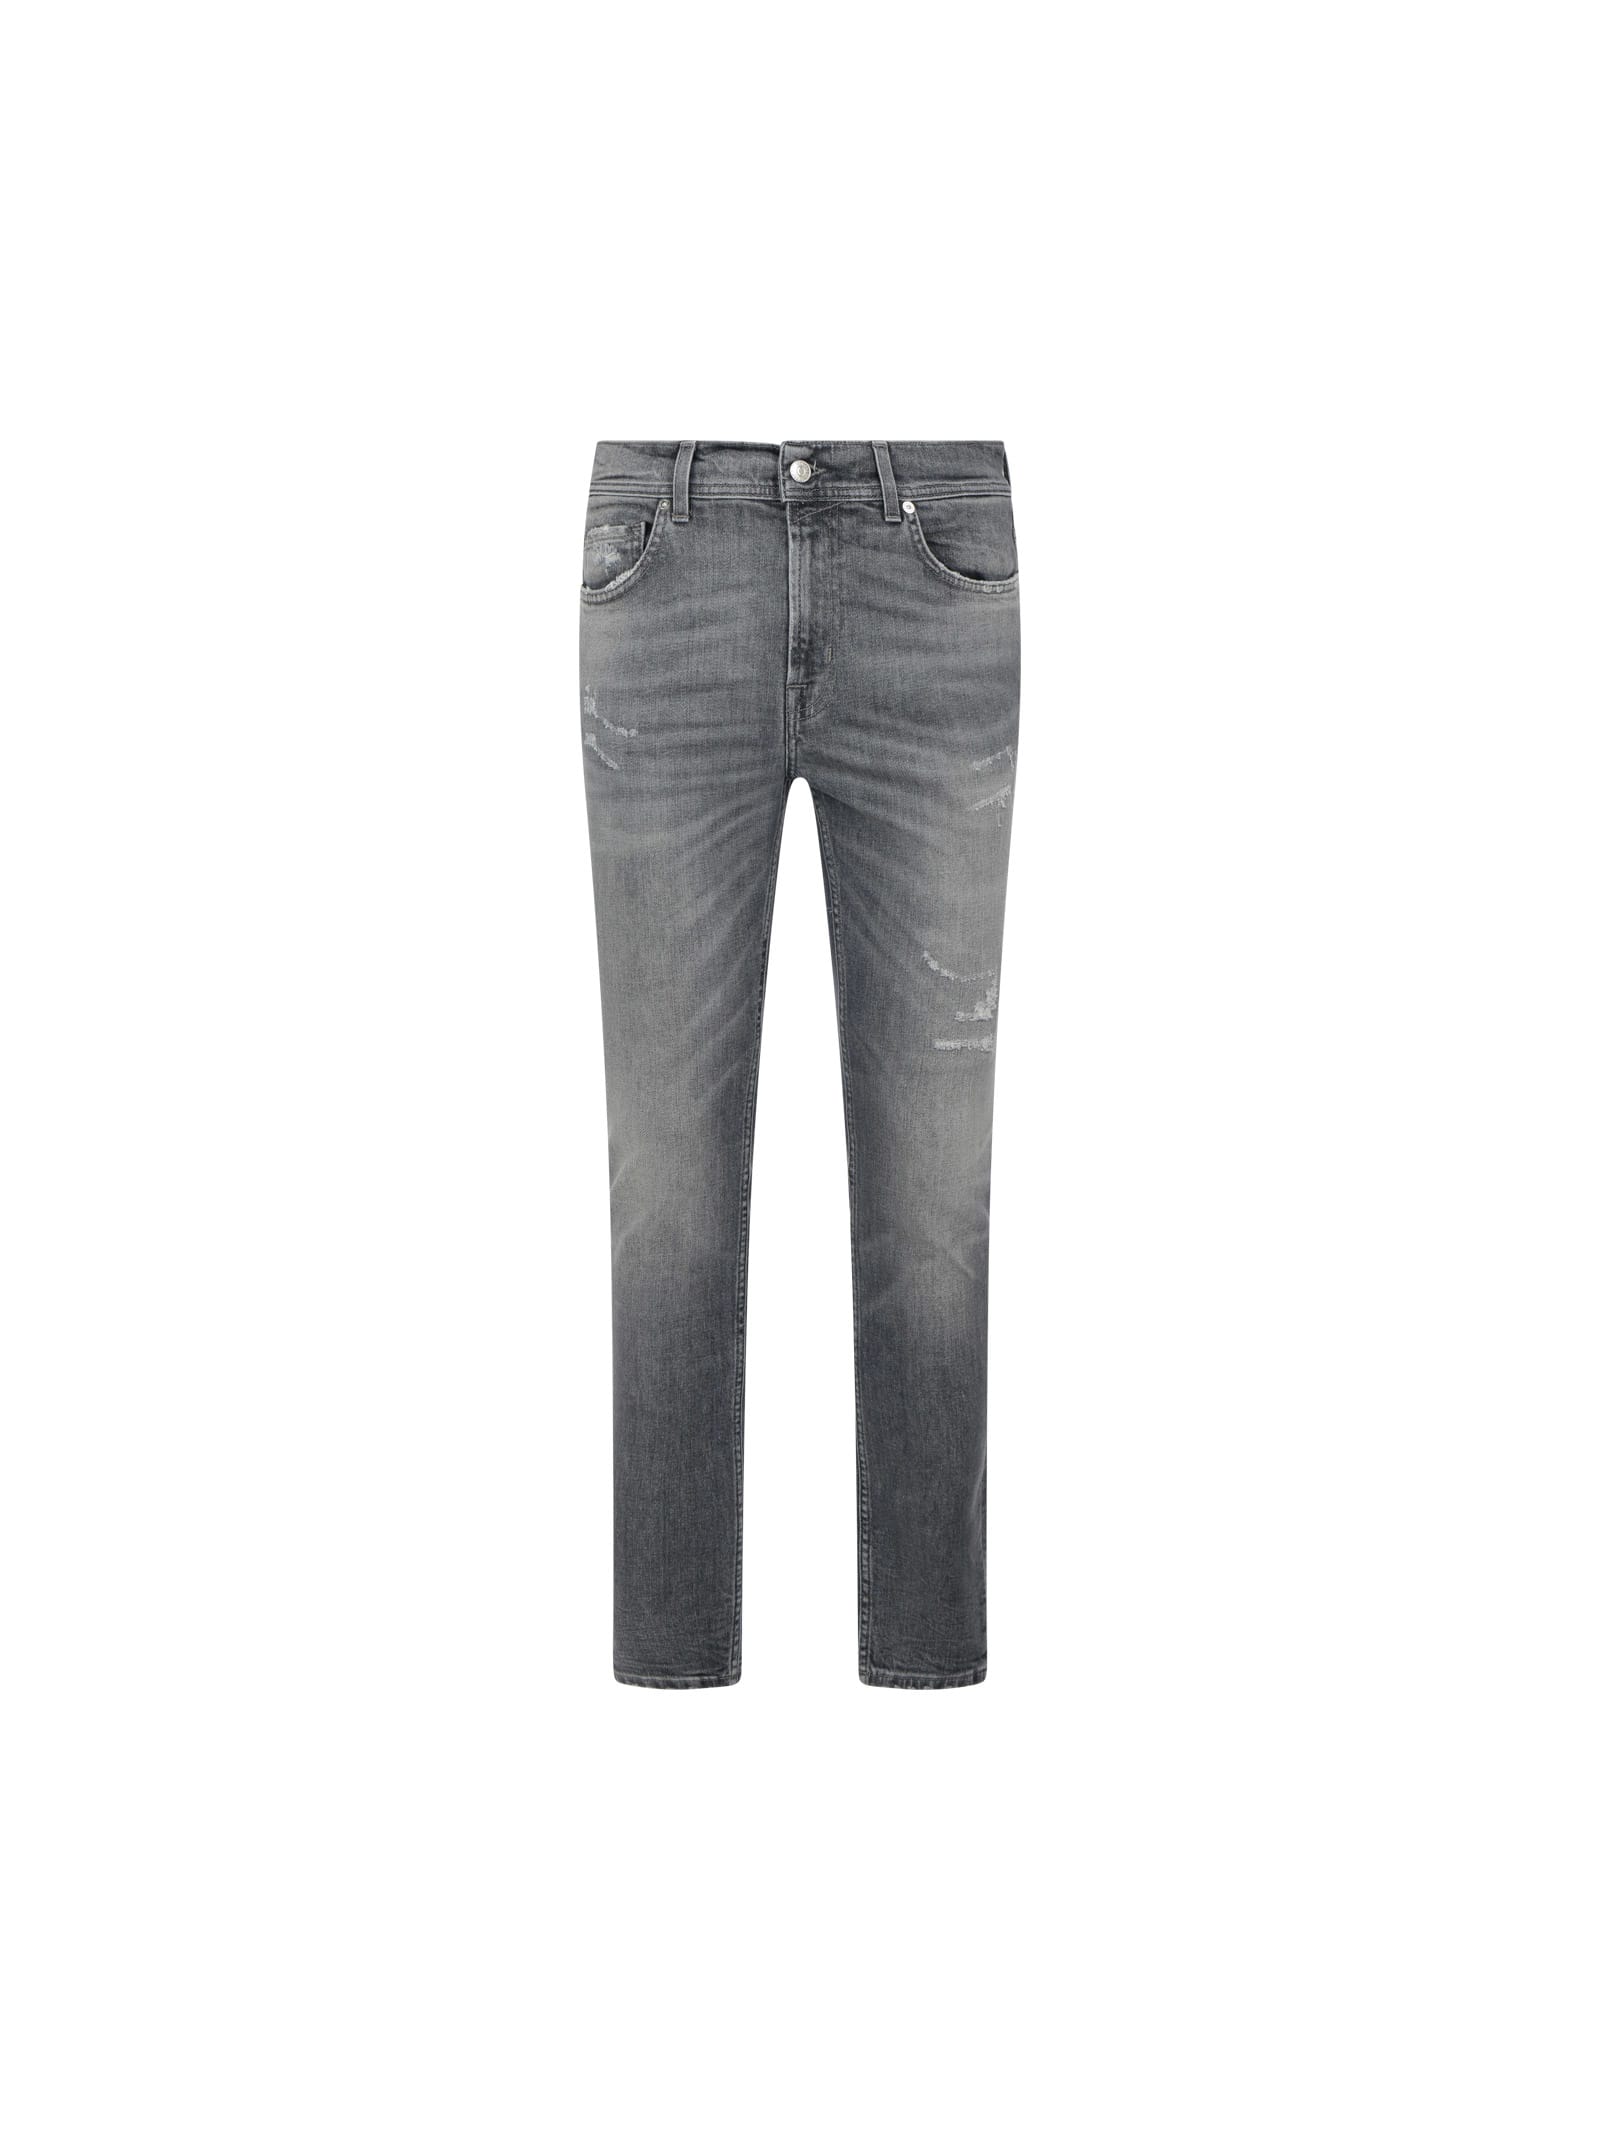 7 For All Mankind Paxtyn Jeans